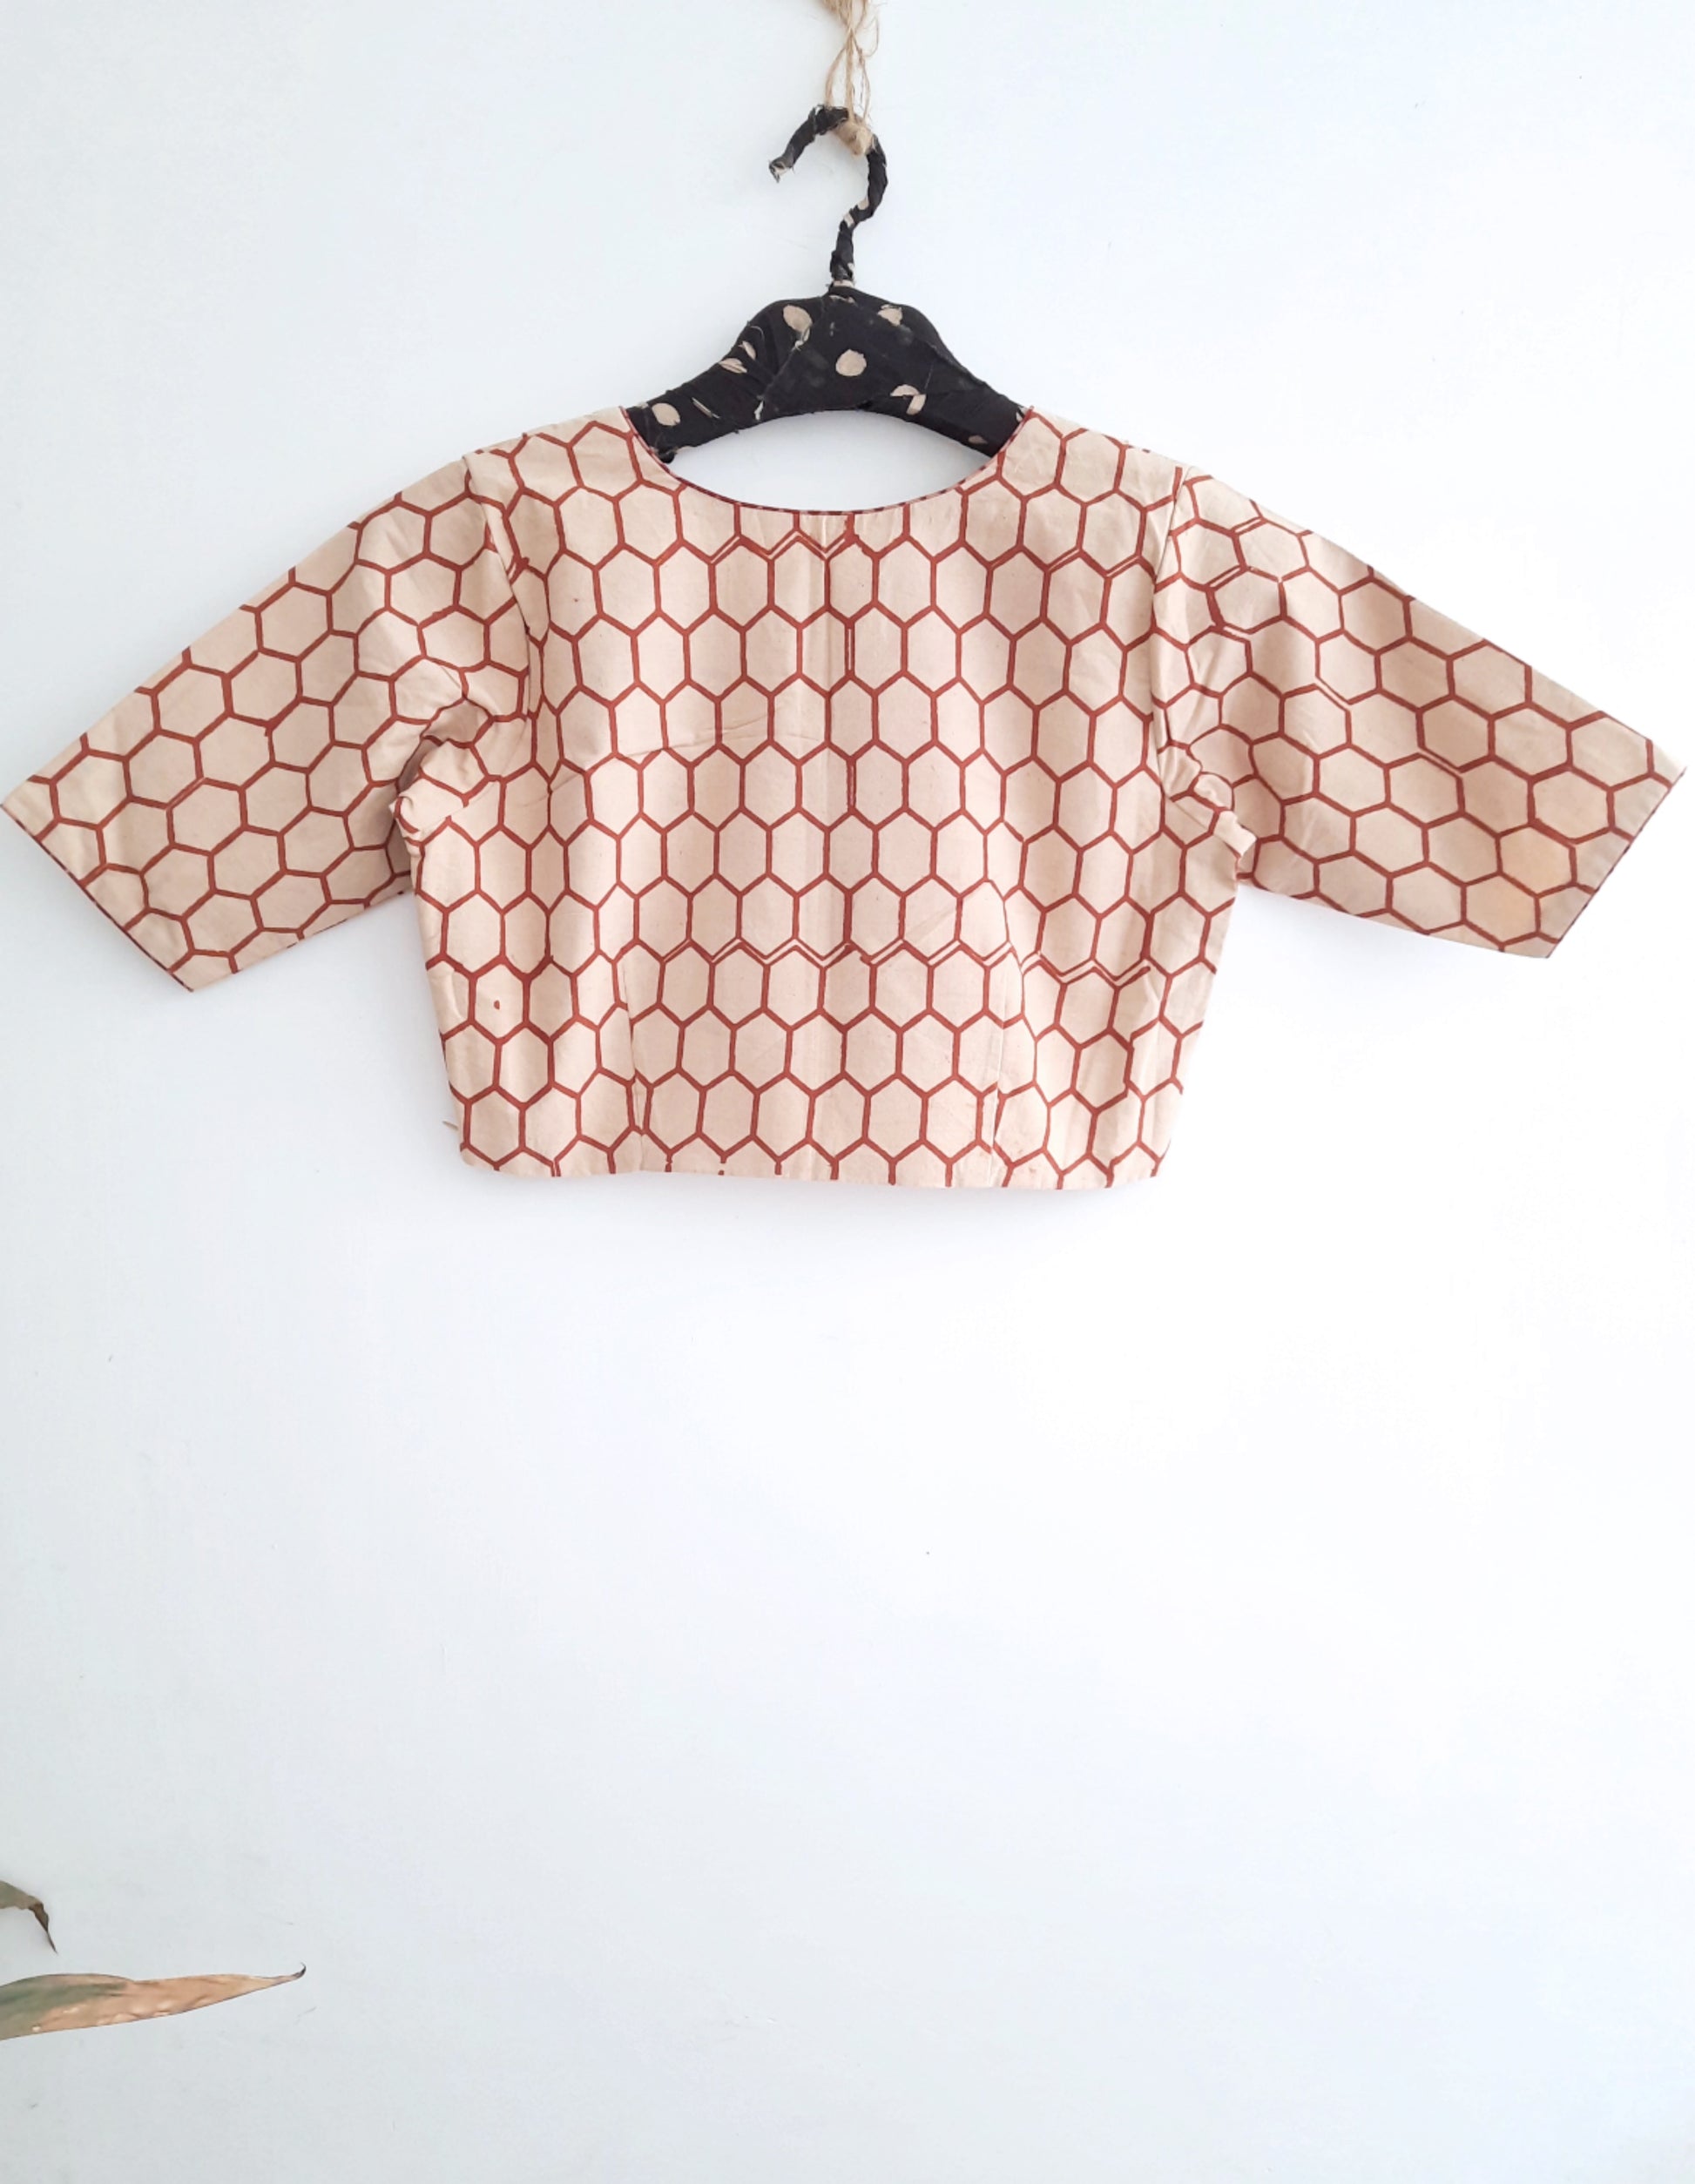 Handmade Ajrakh Blouse: Beige blouse with honeycomb and polka dot prints from Turquoisethestore, showcasing artisanal craftsmanship and natural dyes.